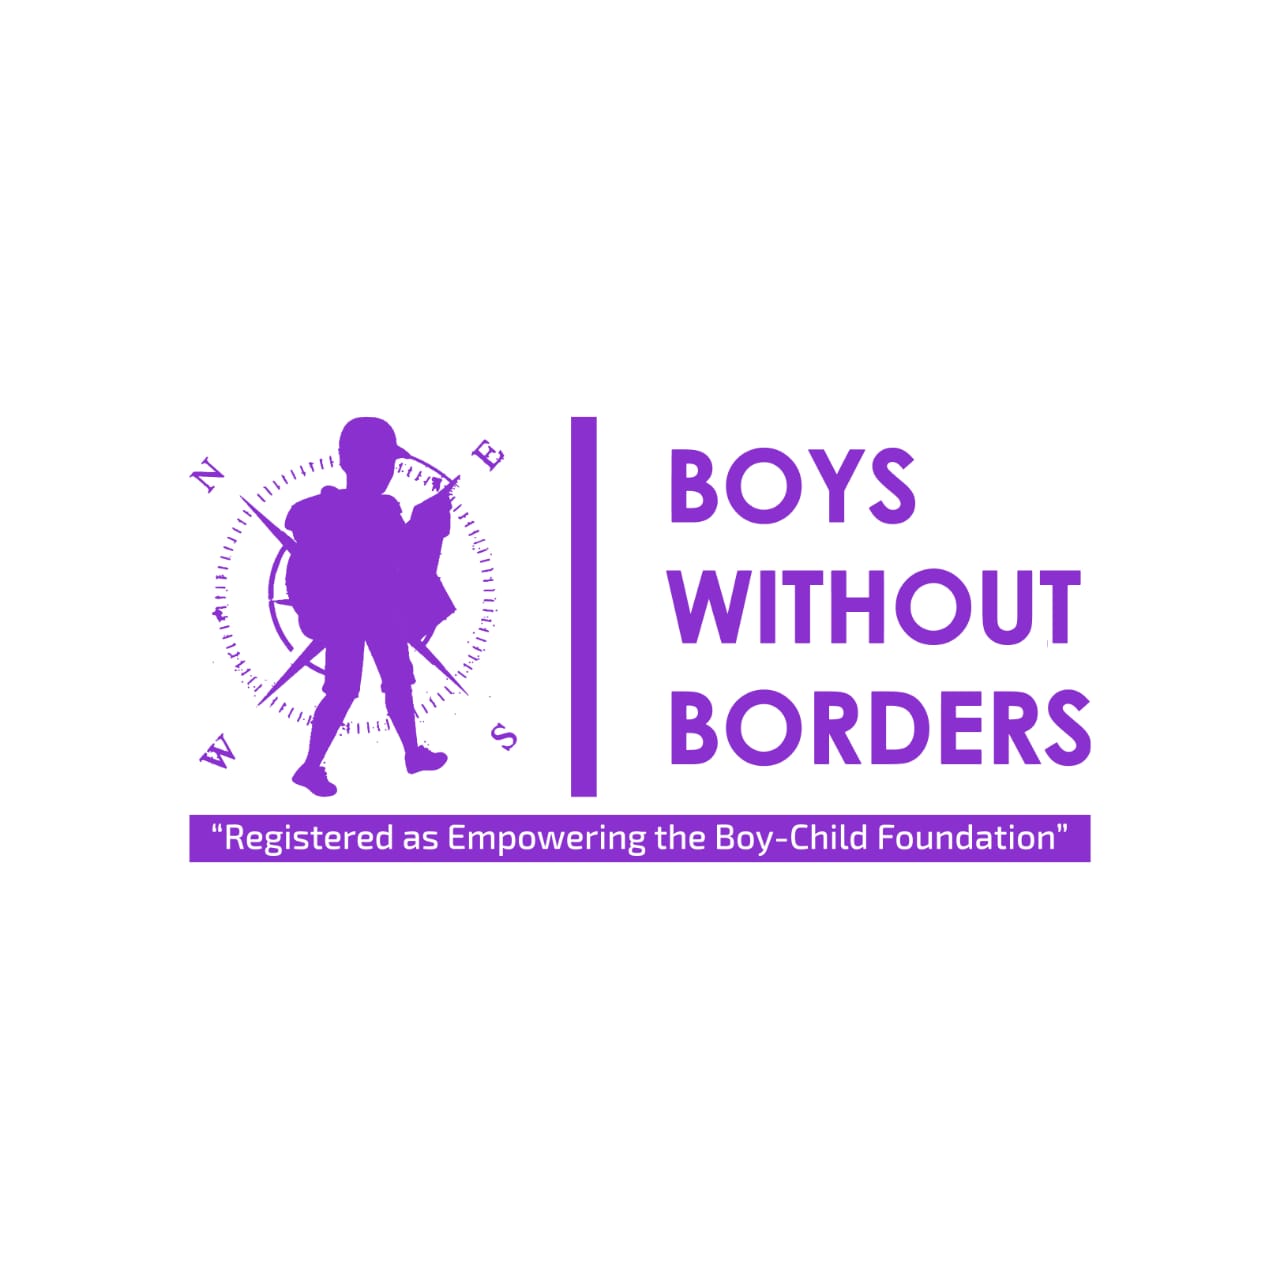 Boys Without Borders